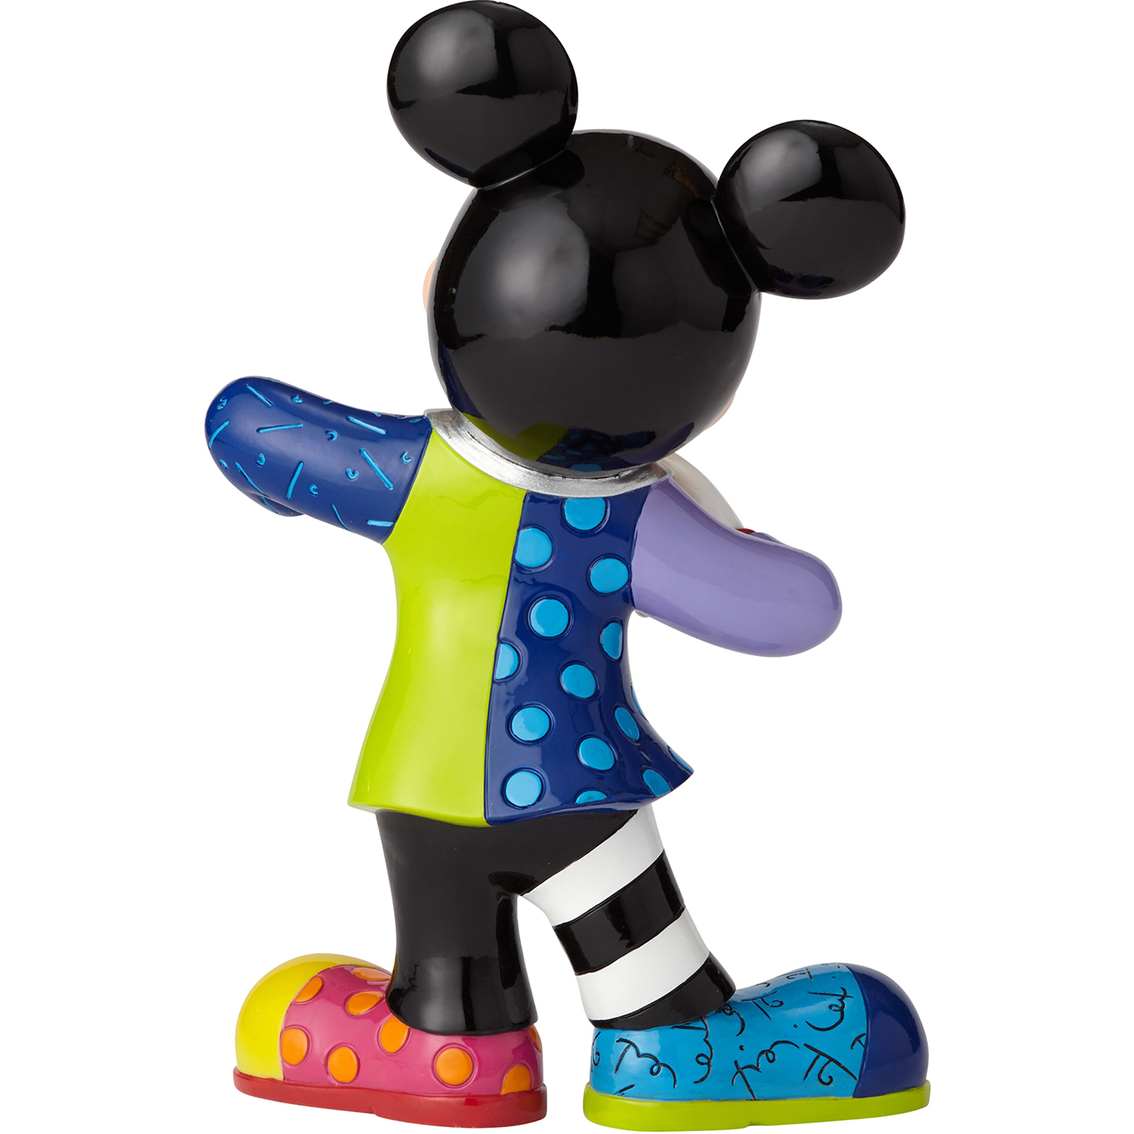 Disney Britto Mickey Mouse Bling Figurine - Image 2 of 2